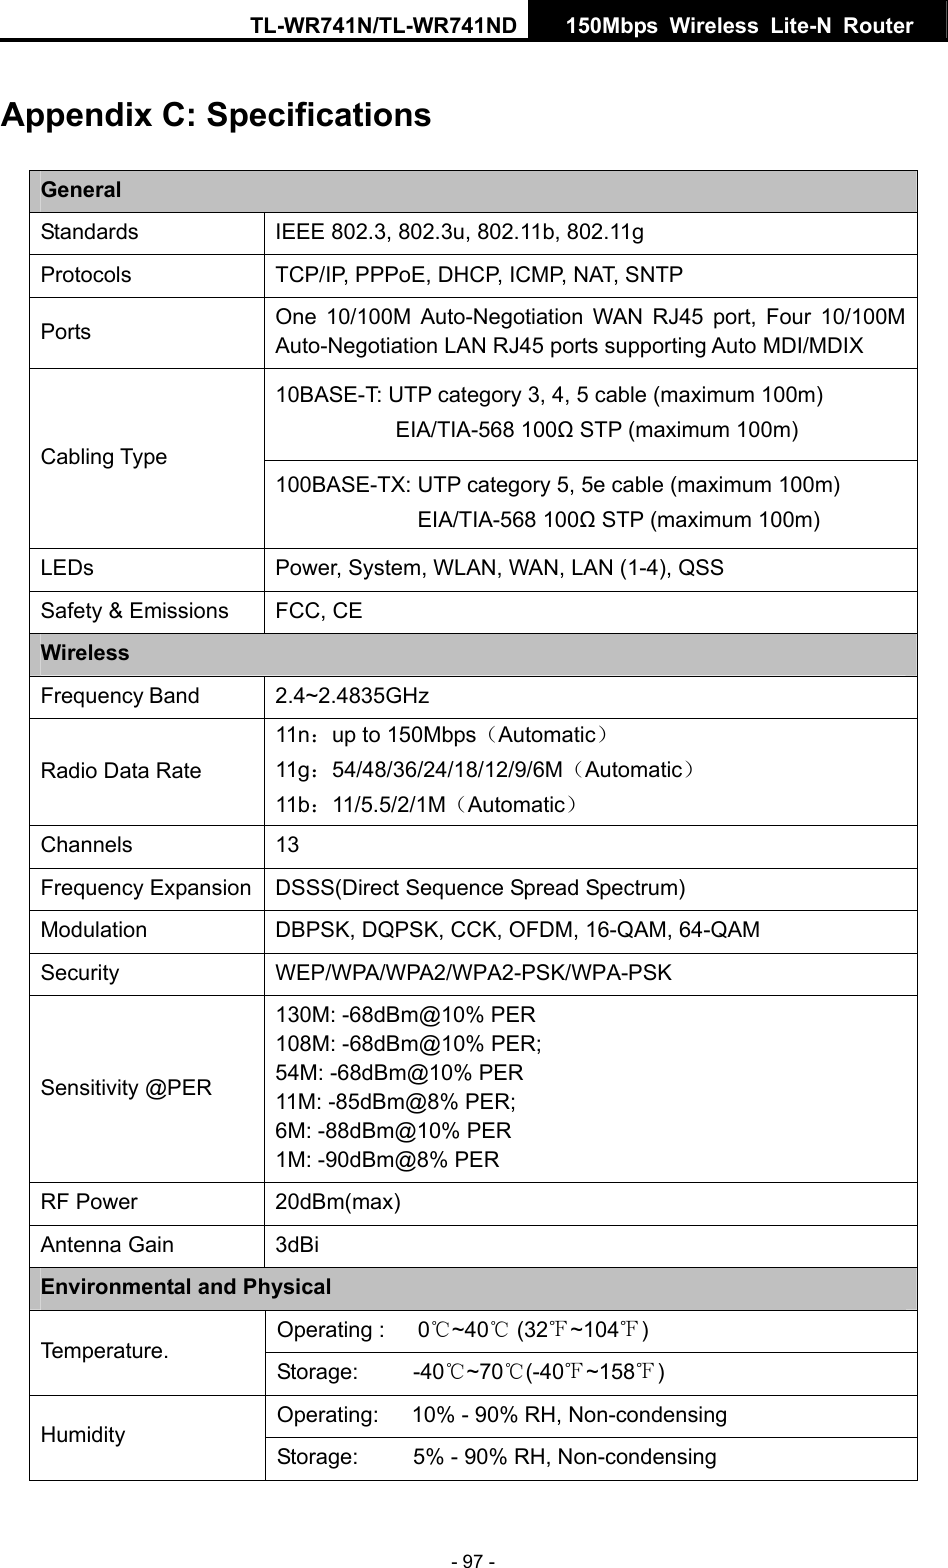 TL-WR741N/TL-WR741ND  150Mbps Wireless Lite-N Router   - 97 - Appendix C: Specifications General Standards IEEE 802.3, 802.3u, 802.11b, 802.11g Protocols  TCP/IP, PPPoE, DHCP, ICMP, NAT, SNTP Ports  One 10/100M Auto-Negotiation WAN RJ45 port, Four 10/100M Auto-Negotiation LAN RJ45 ports supporting Auto MDI/MDIX 10BASE-T: UTP category 3, 4, 5 cable (maximum 100m) EIA/TIA-568 100Ω STP (maximum 100m) Cabling Type 100BASE-TX: UTP category 5, 5e cable (maximum 100m) EIA/TIA-568 100Ω STP (maximum 100m) LEDs  Power, System, WLAN, WAN, LAN (1-4), QSS Safety &amp; Emissions  FCC, CE Wireless Frequency Band 2.4~2.4835GHz Radio Data Rate 11n：up to 150Mbps（Automatic） 11g：54/48/36/24/18/12/9/6M（Automatic） 11b：11/5.5/2/1M（Automatic） Channels 13 Frequency Expansion  DSSS(Direct Sequence Spread Spectrum) Modulation  DBPSK, DQPSK, CCK, OFDM, 16-QAM, 64-QAM Security WEP/WPA/WPA2/WPA2-PSK/WPA-PSK Sensitivity @PER 130M: -68dBm@10% PER 108M: -68dBm@10% PER;   54M: -68dBm@10% PER 11M: -85dBm@8% PER;   6M: -88dBm@10% PER 1M: -90dBm@8% PER RF Power  20dBm(max) Antenna Gain  3dBi Environmental and Physical Operating :   0℃~40℃ (32 ~104℉℉) Temperature.  Storage:     -40℃~70℃(-40℉~158℉) Operating:      10% - 90% RH, Non-condensing Humidity  Storage:          5% - 90% RH, Non-condensing 